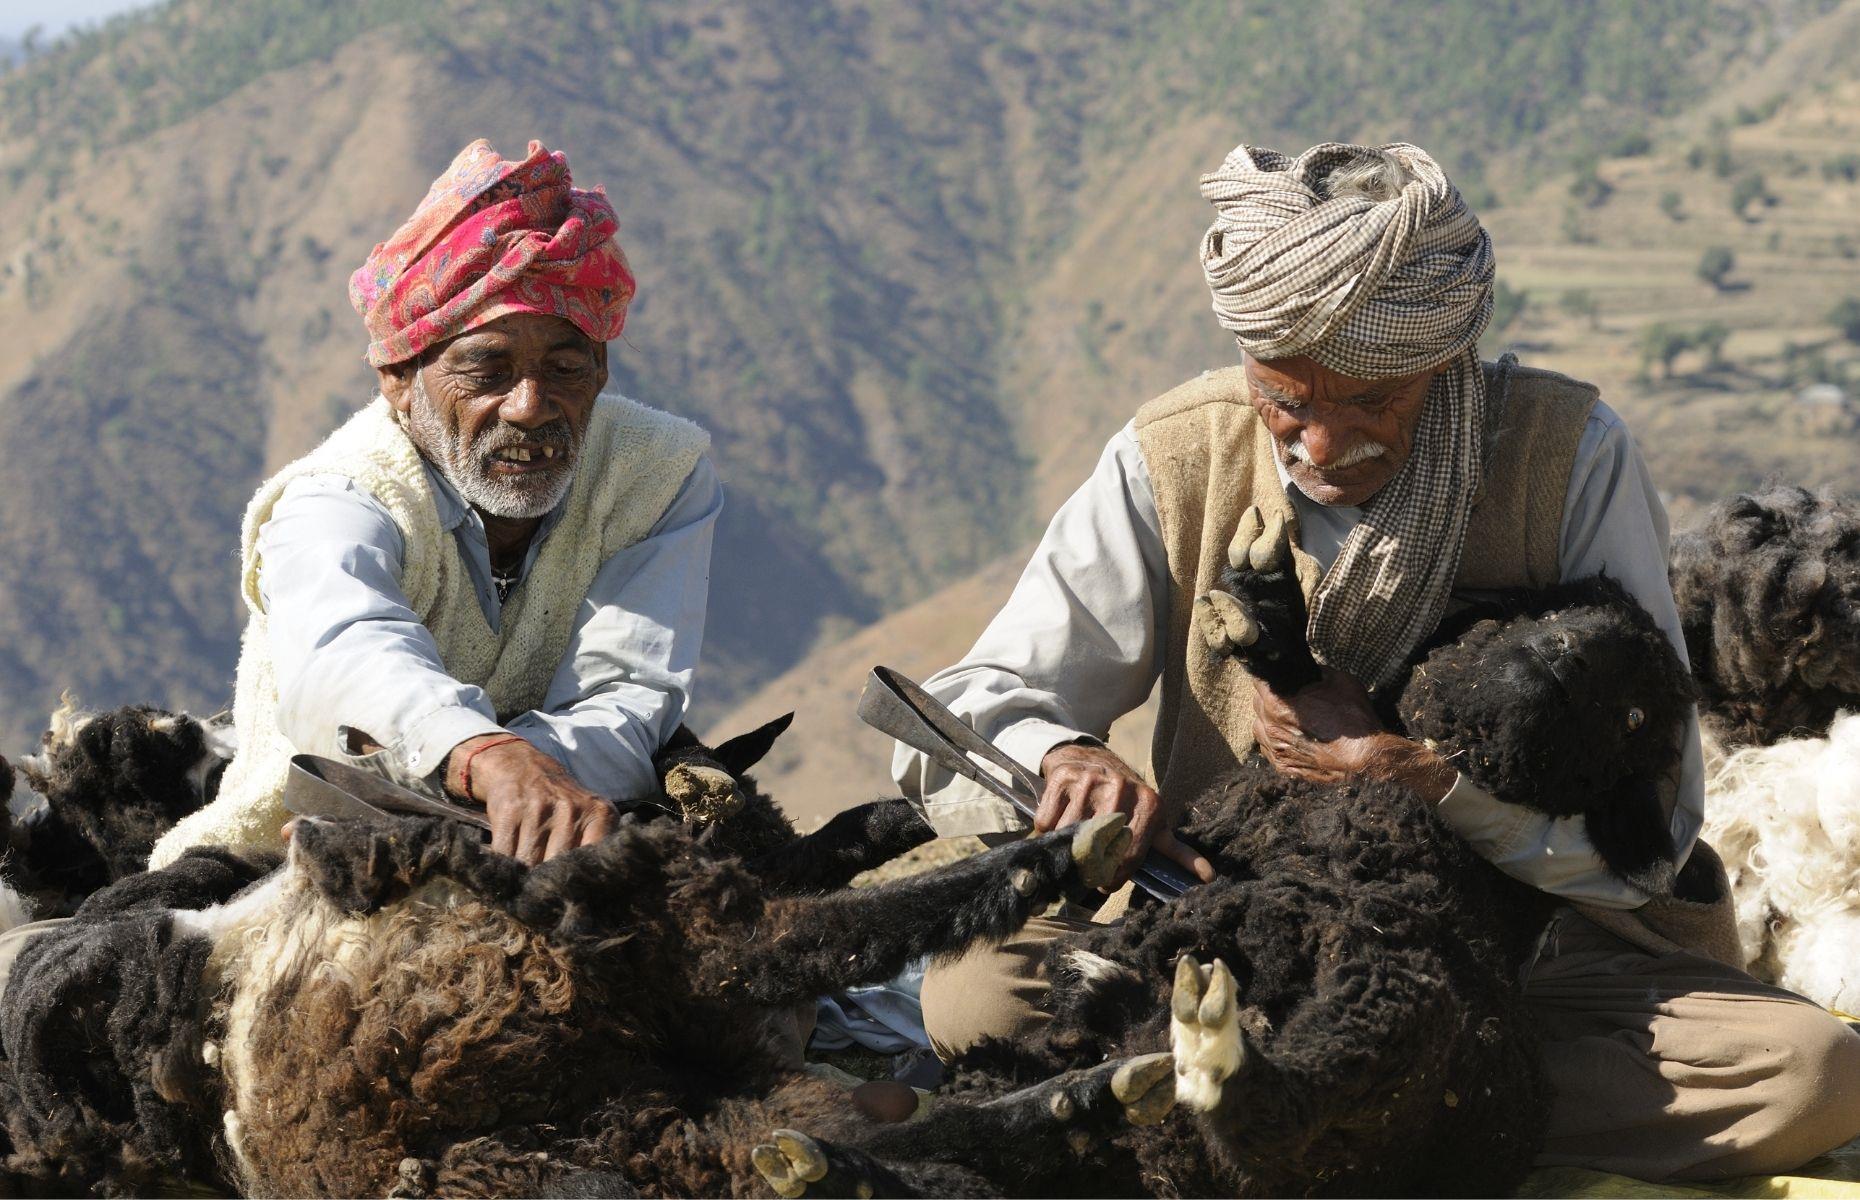 <p>While there are conflicting theories about the origins of the Gaddi, many believe they descended from persecuted refugees of Aurangzeb's reign, between 1658 and 1707. This historic tribe have lived the same way for centuries, selling wool and goat skins to traders, or exchanging meat for food during their travels. Sadly, global warming is making life increasingly difficult for the Gaddi, as good grazing pastures become harder to find – although the Gaddi believe the Hindu deity, Shiva, is responsible for the unpredictable weather.</p>